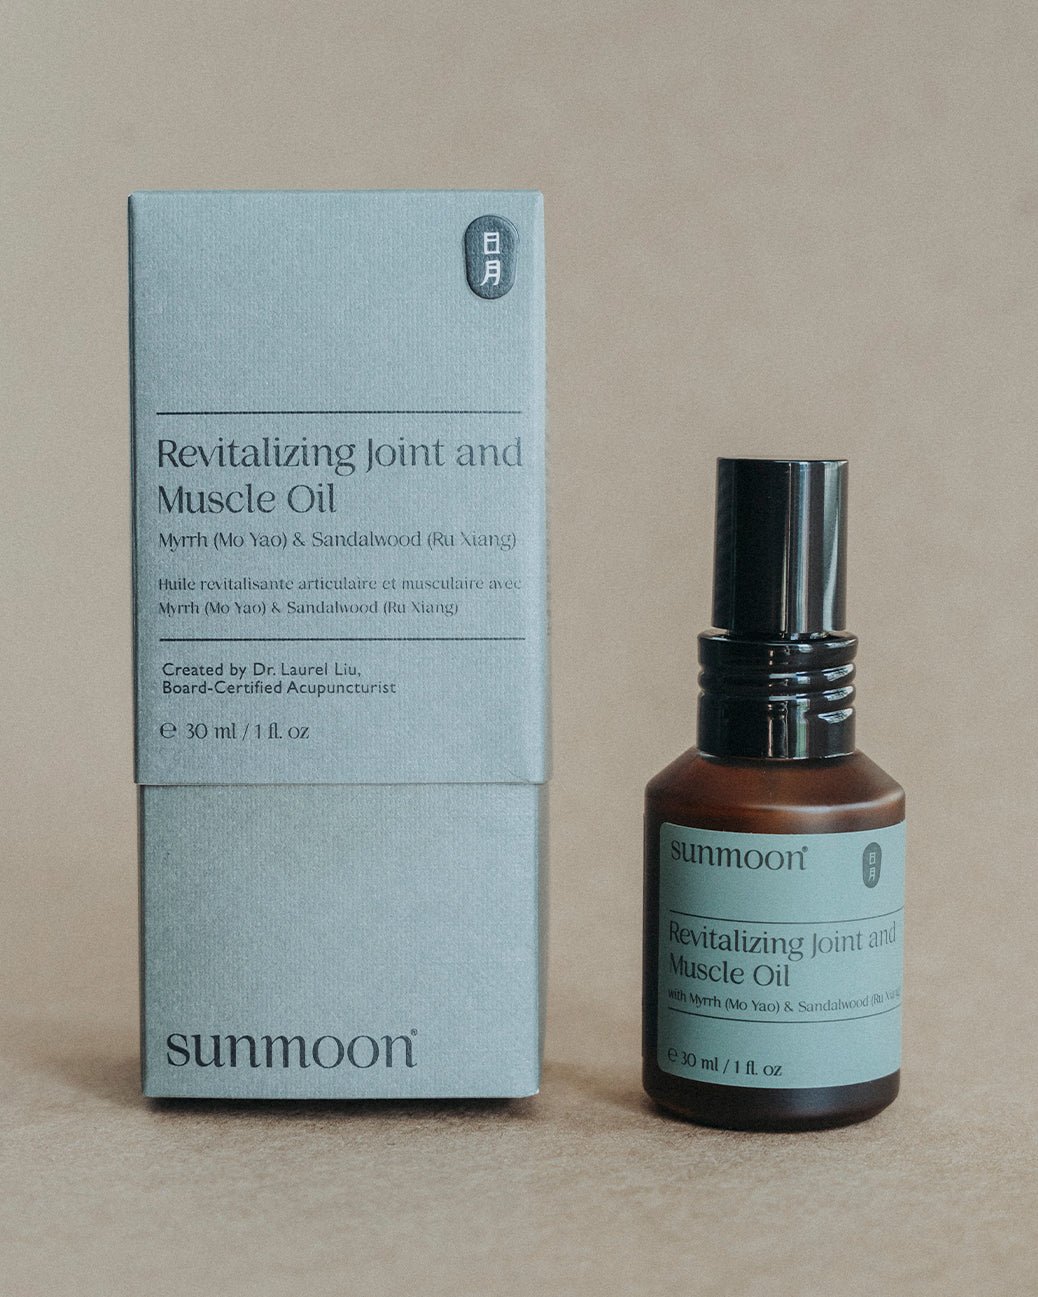 Revitalizing Joint and Muscle Oil with Myrrh (Mo Yao) & Sandalwood (Ru Xiang)